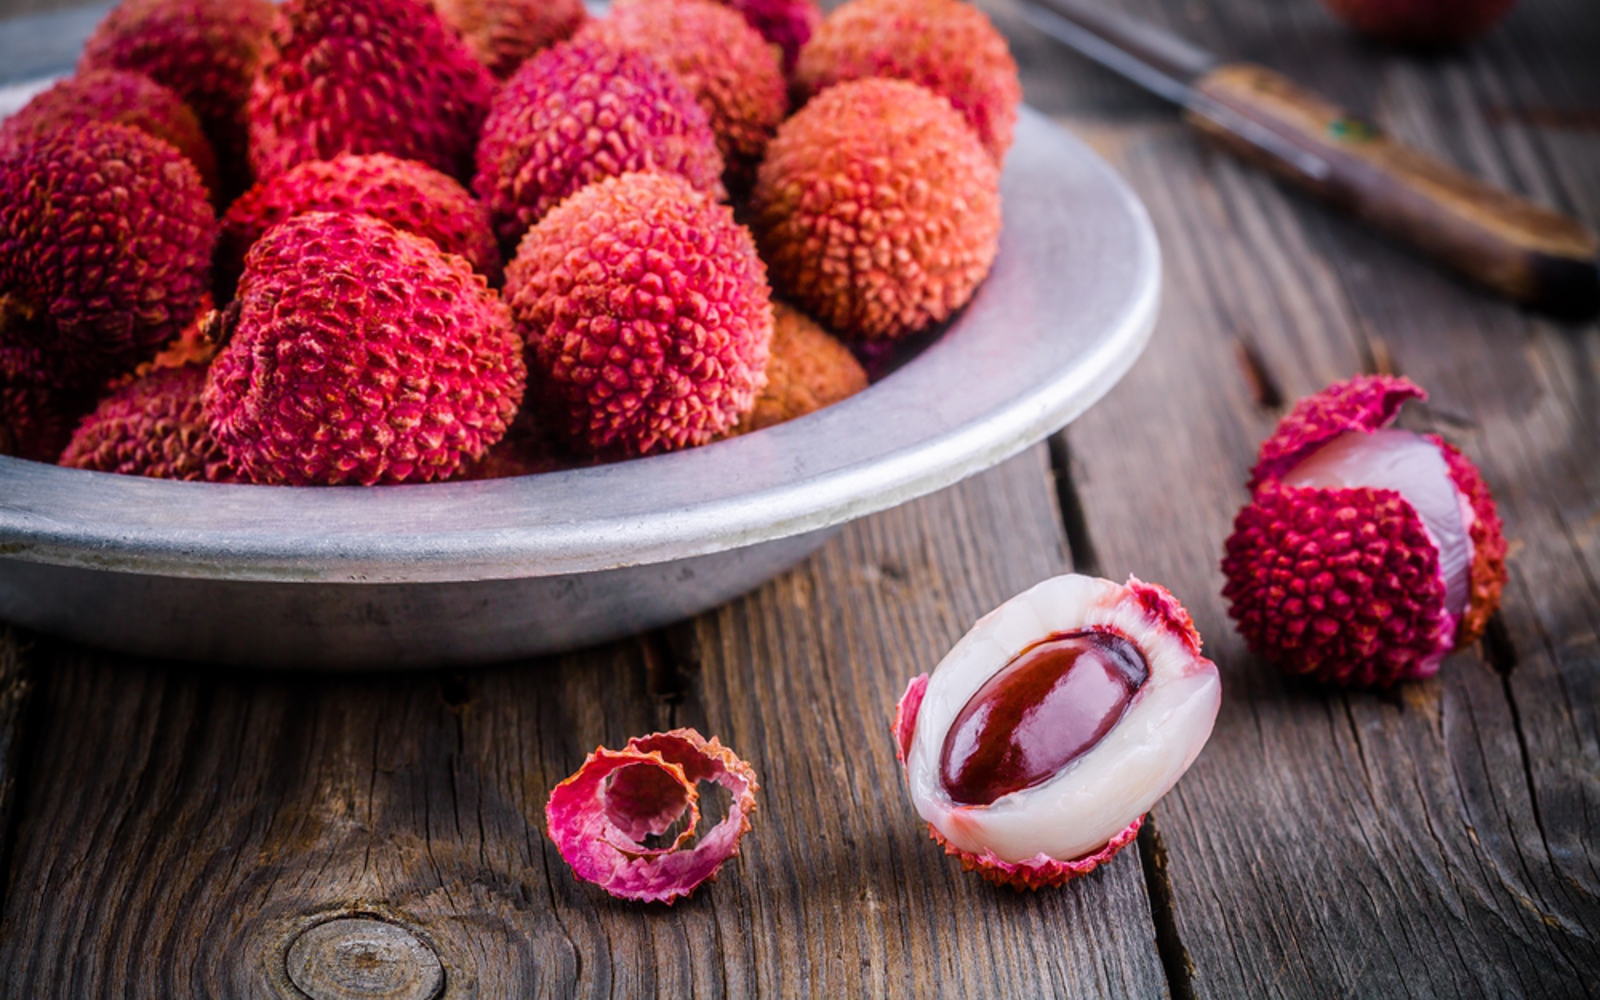 Lychee Longan And Rambutan Why You Need To Be Eating These Cool Juicy Exotic Asian Fruits This Summer One Green Planet,Quinoa Protein Content